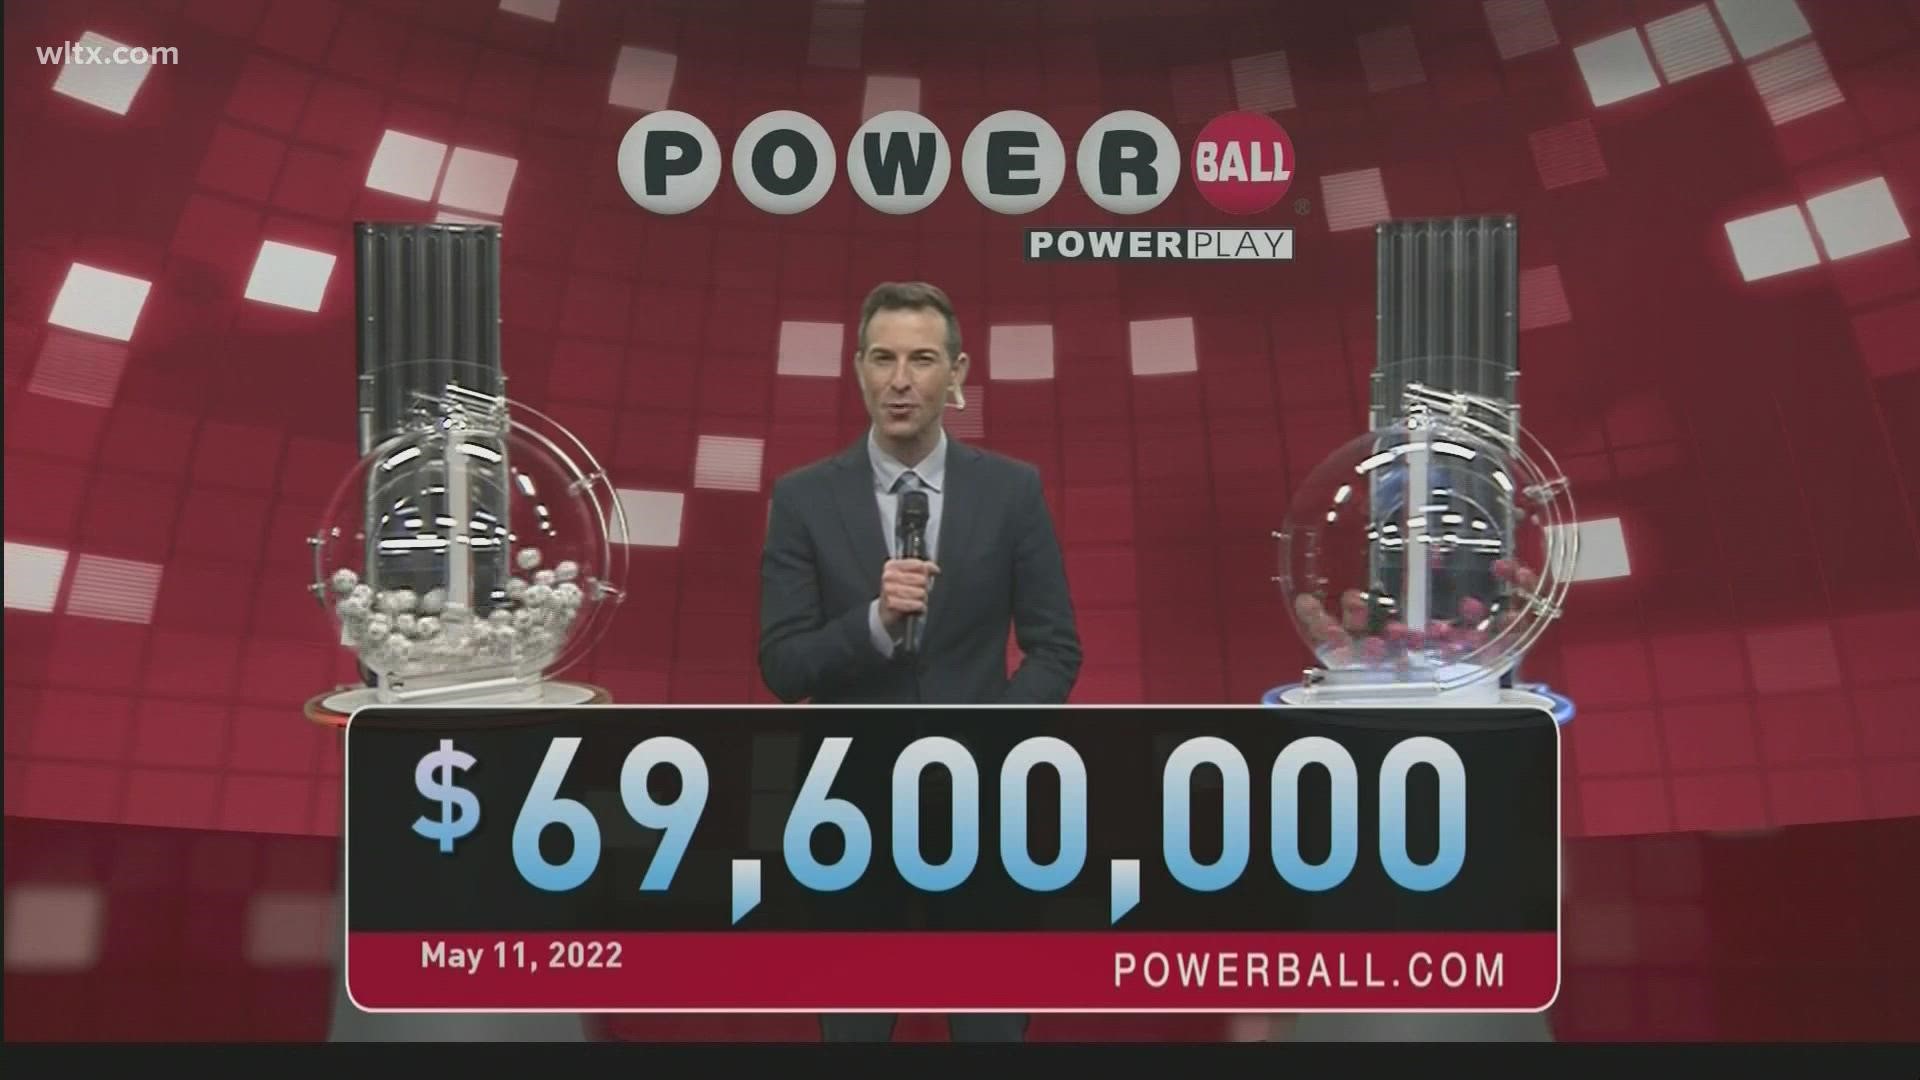 Here are the winning Powerball numbers for Wednesday, May 11, 2022.